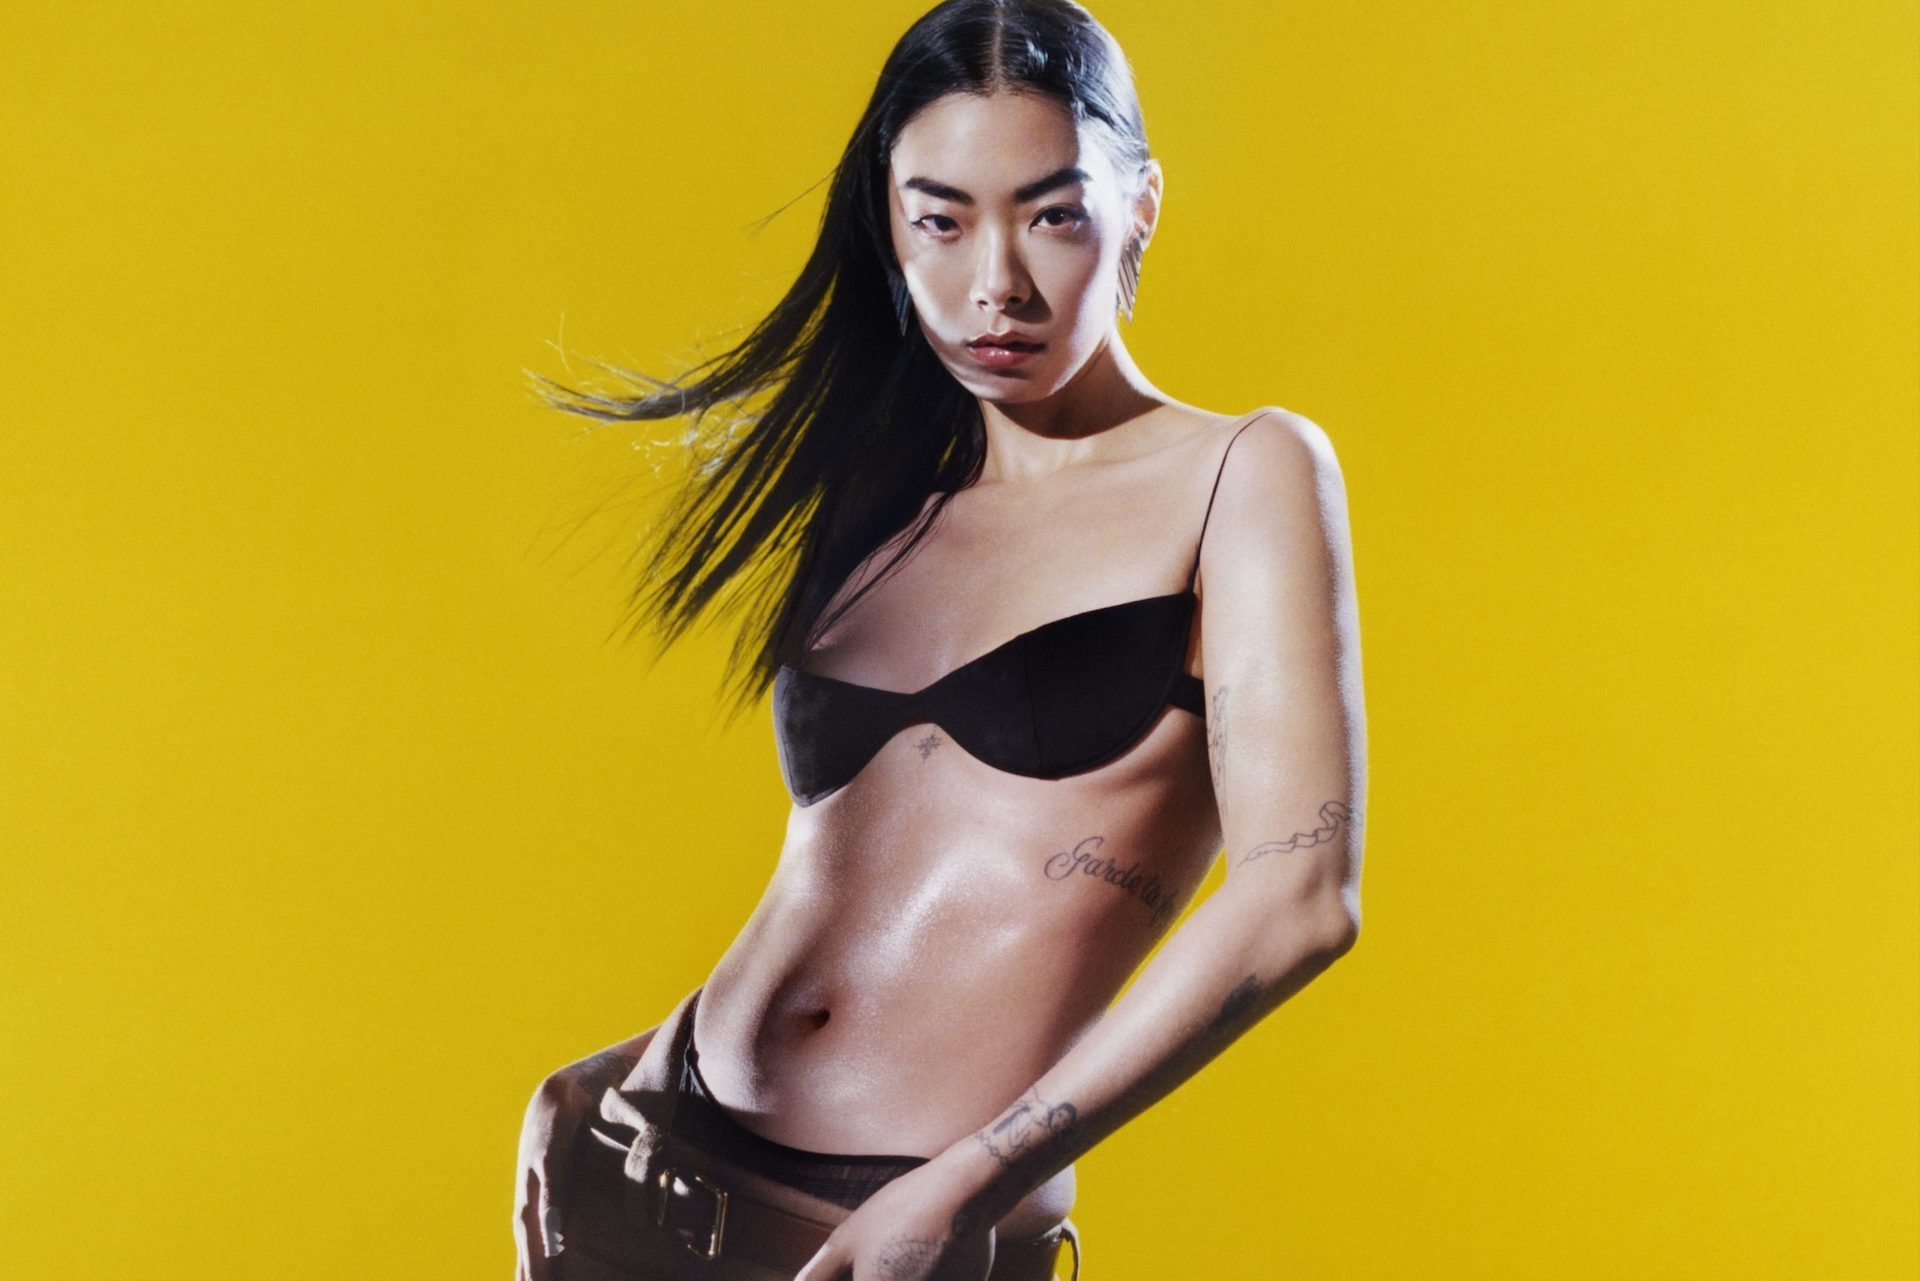 Rina Sawayama is back. After the commercial success of her 2020 debut record, SAWAYAMA, the Japanese-American singer returns with the release of her sophomore effort, 'Hold the Girl.'